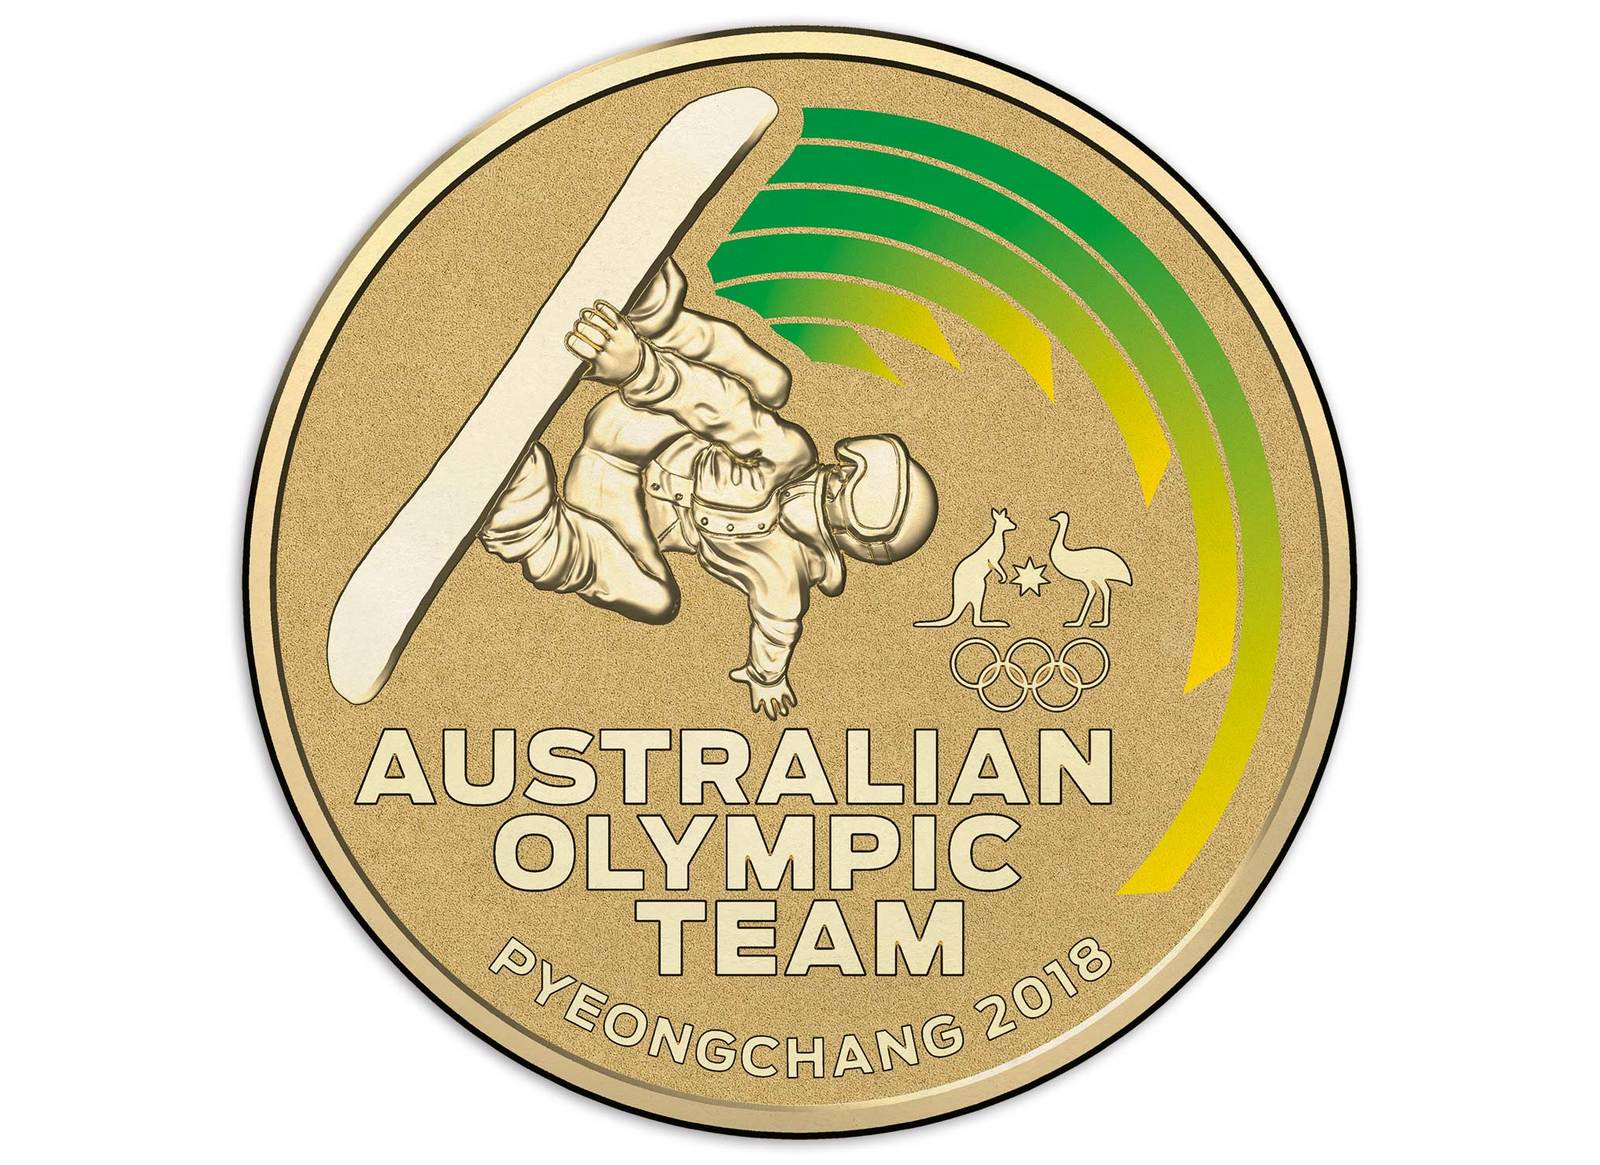 2018 $1 Pyeonchang Australian Olympic Team Frosted Unc Coin